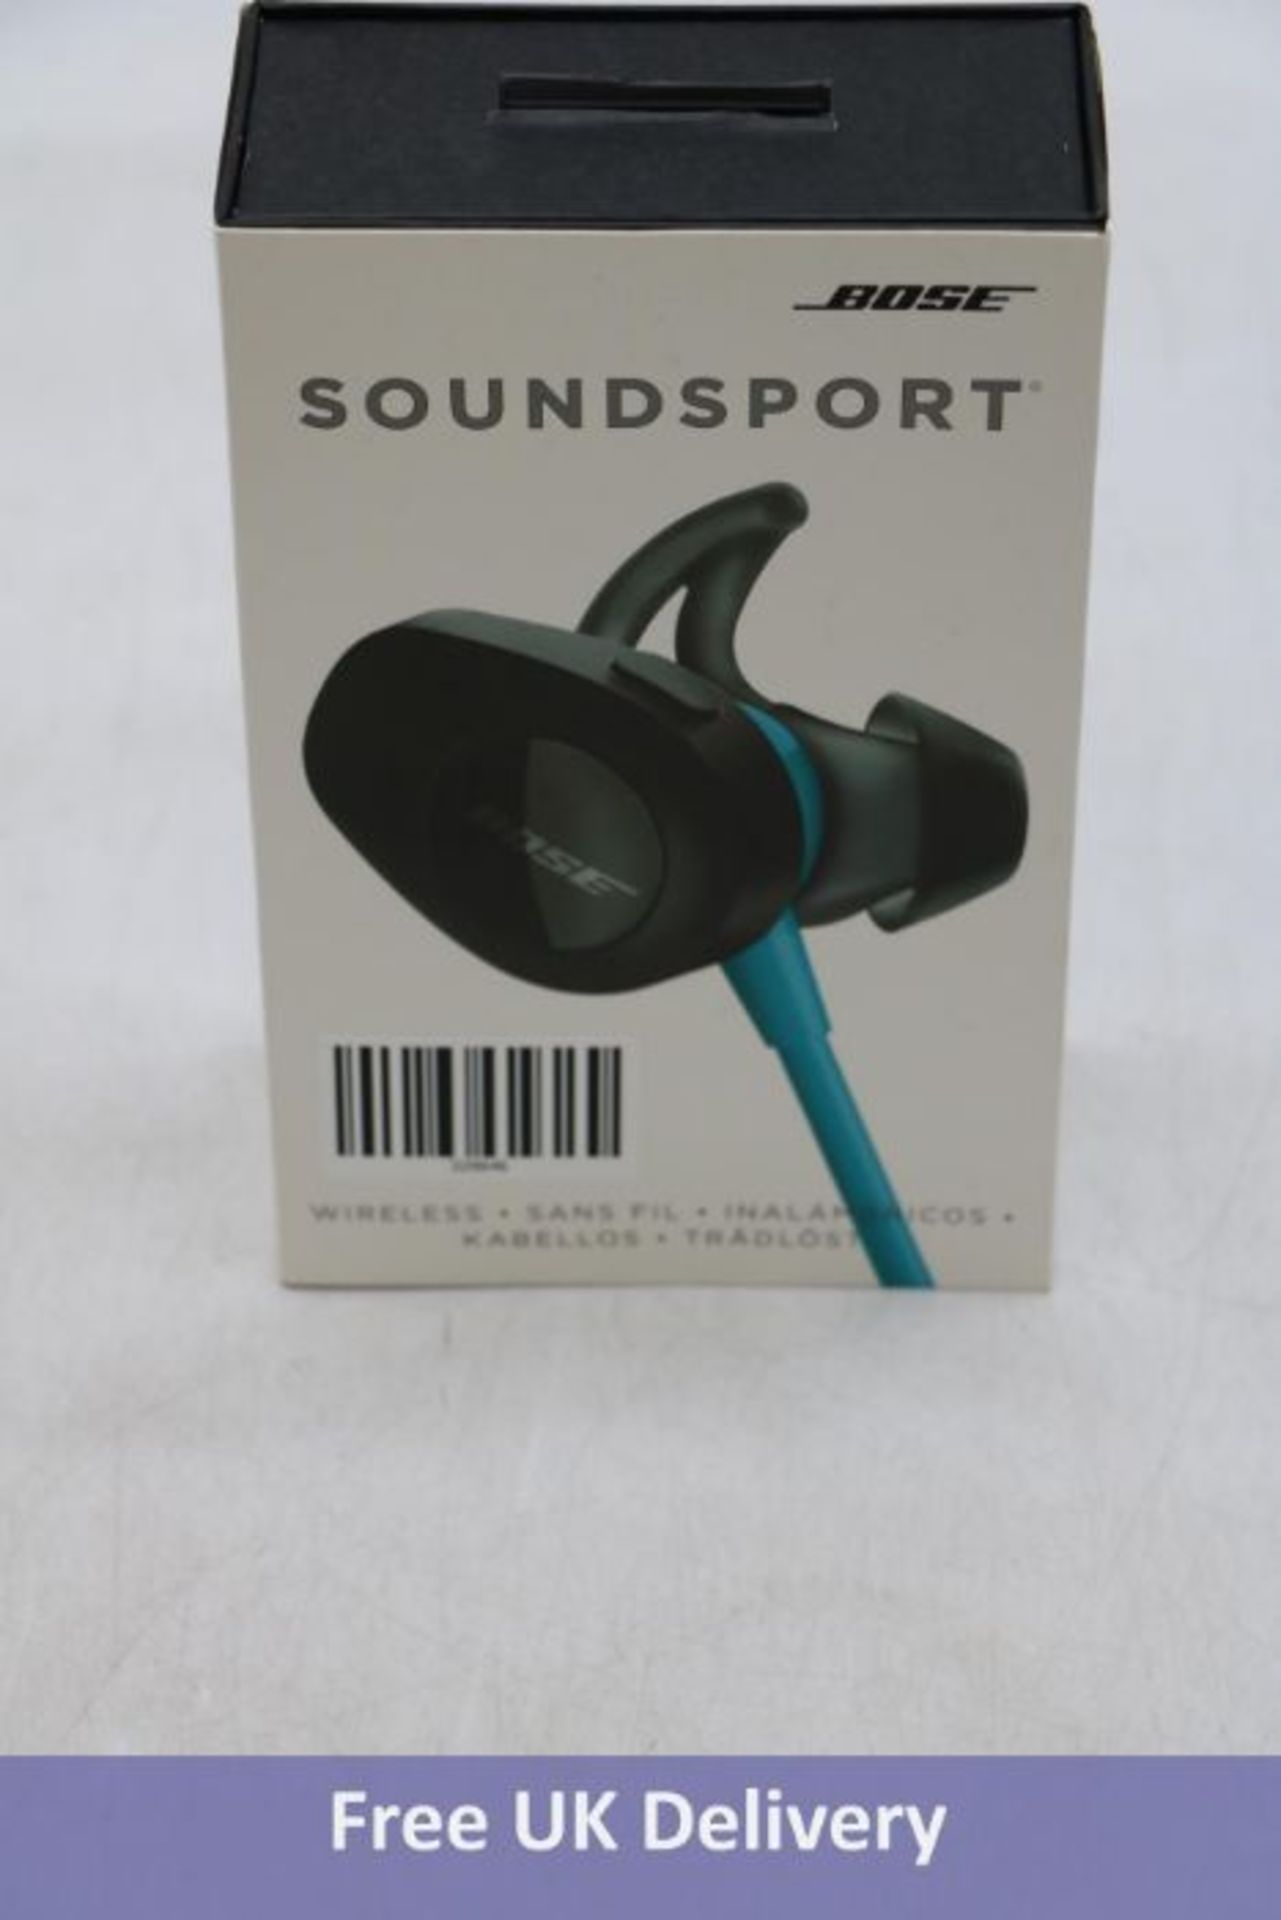 Bose SoundSport Earbud Bluetooth Earphones, Blue. Used, not tested